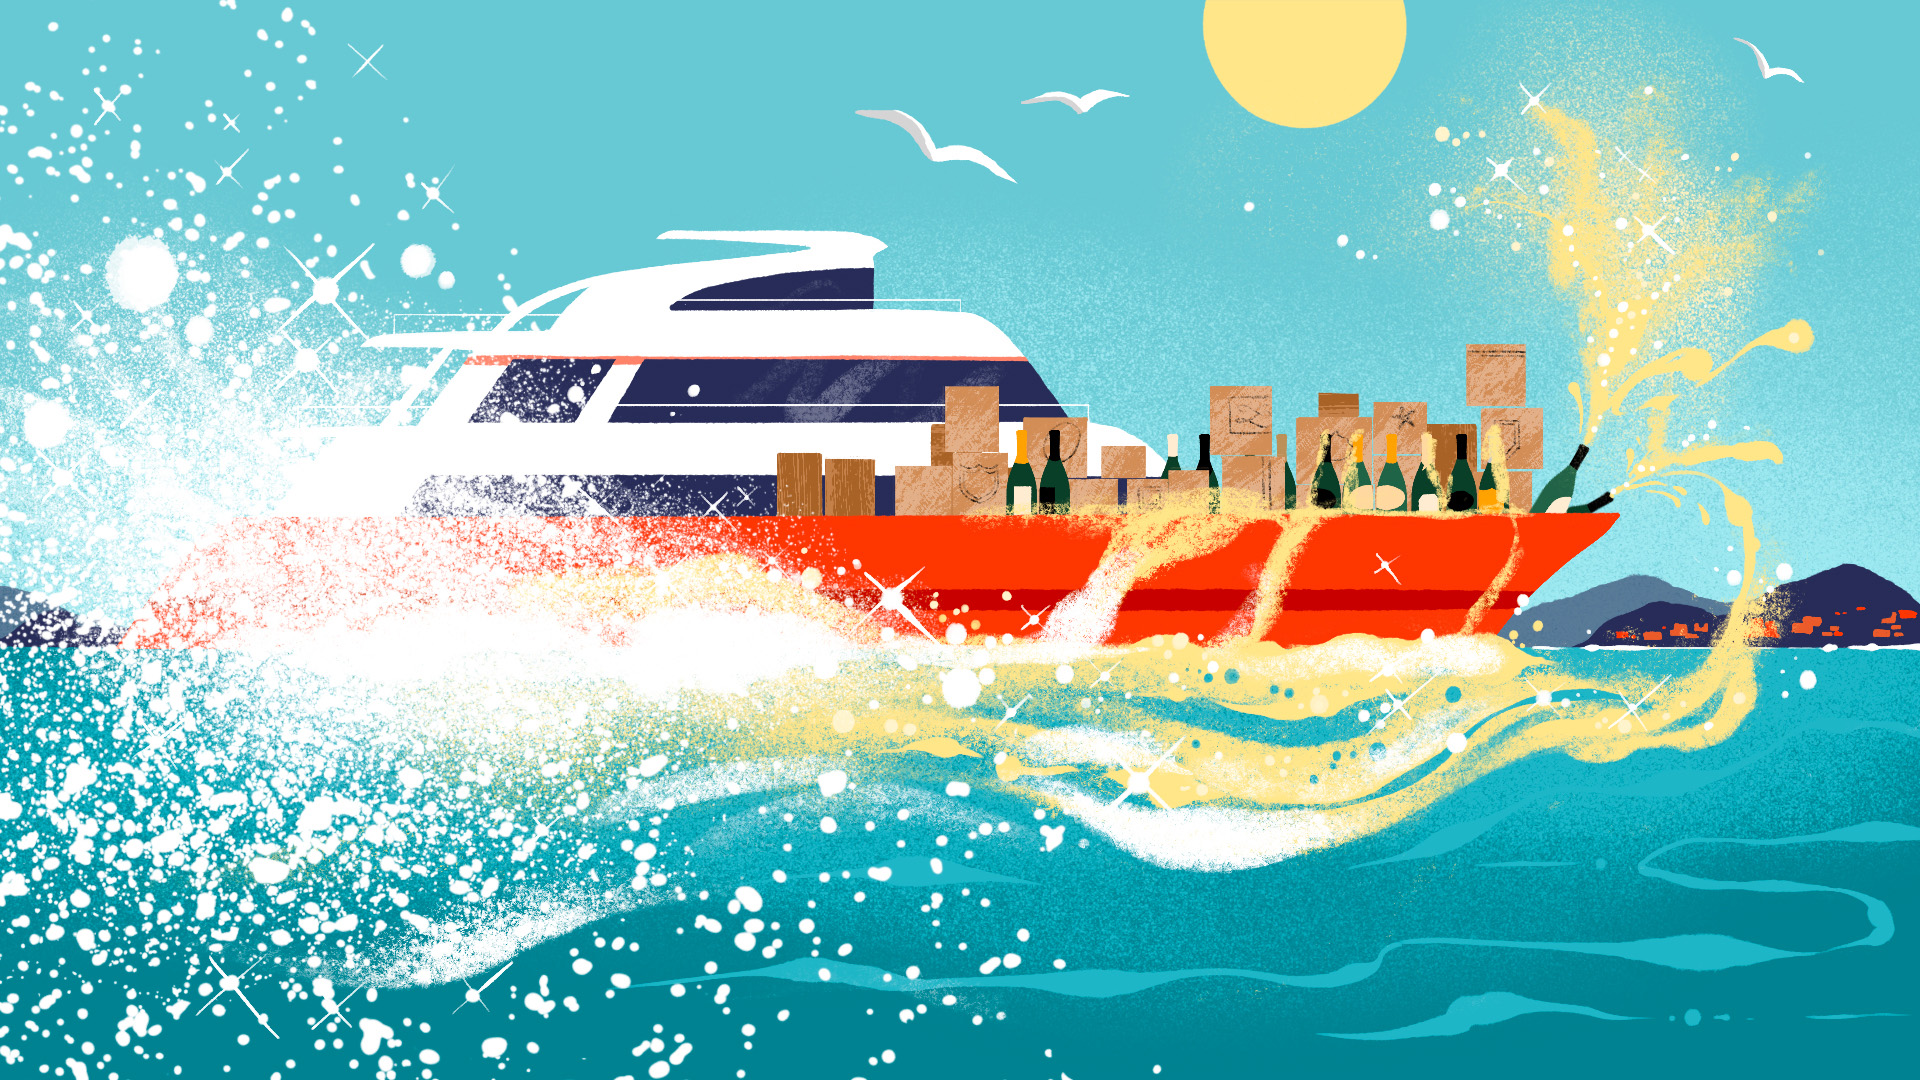 Illustration of a fancy yacht with lots of wine onboard which is overflowing into the ocean